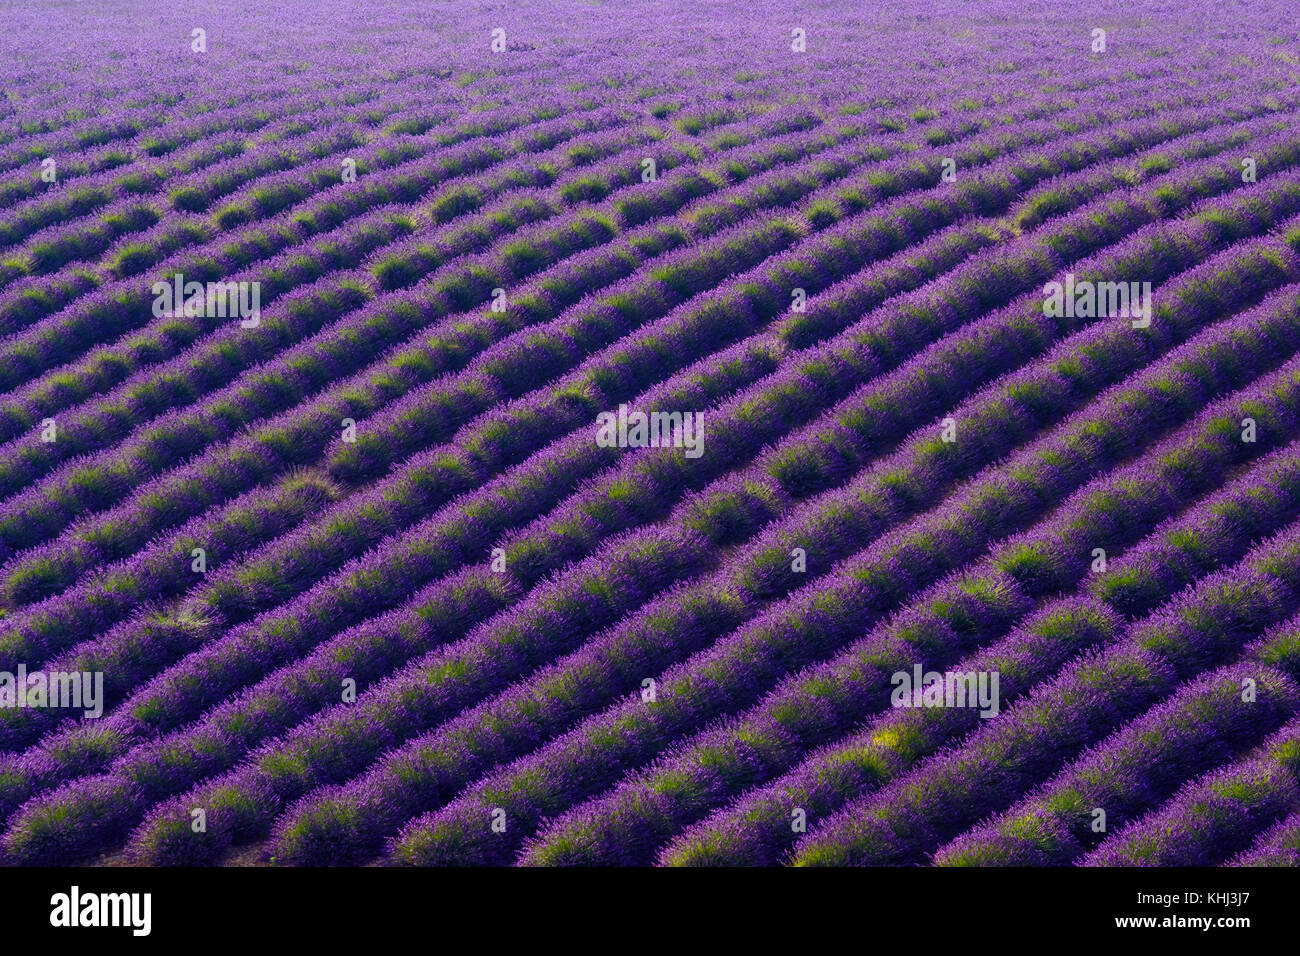 Blooming lavender in a field Stock Photo